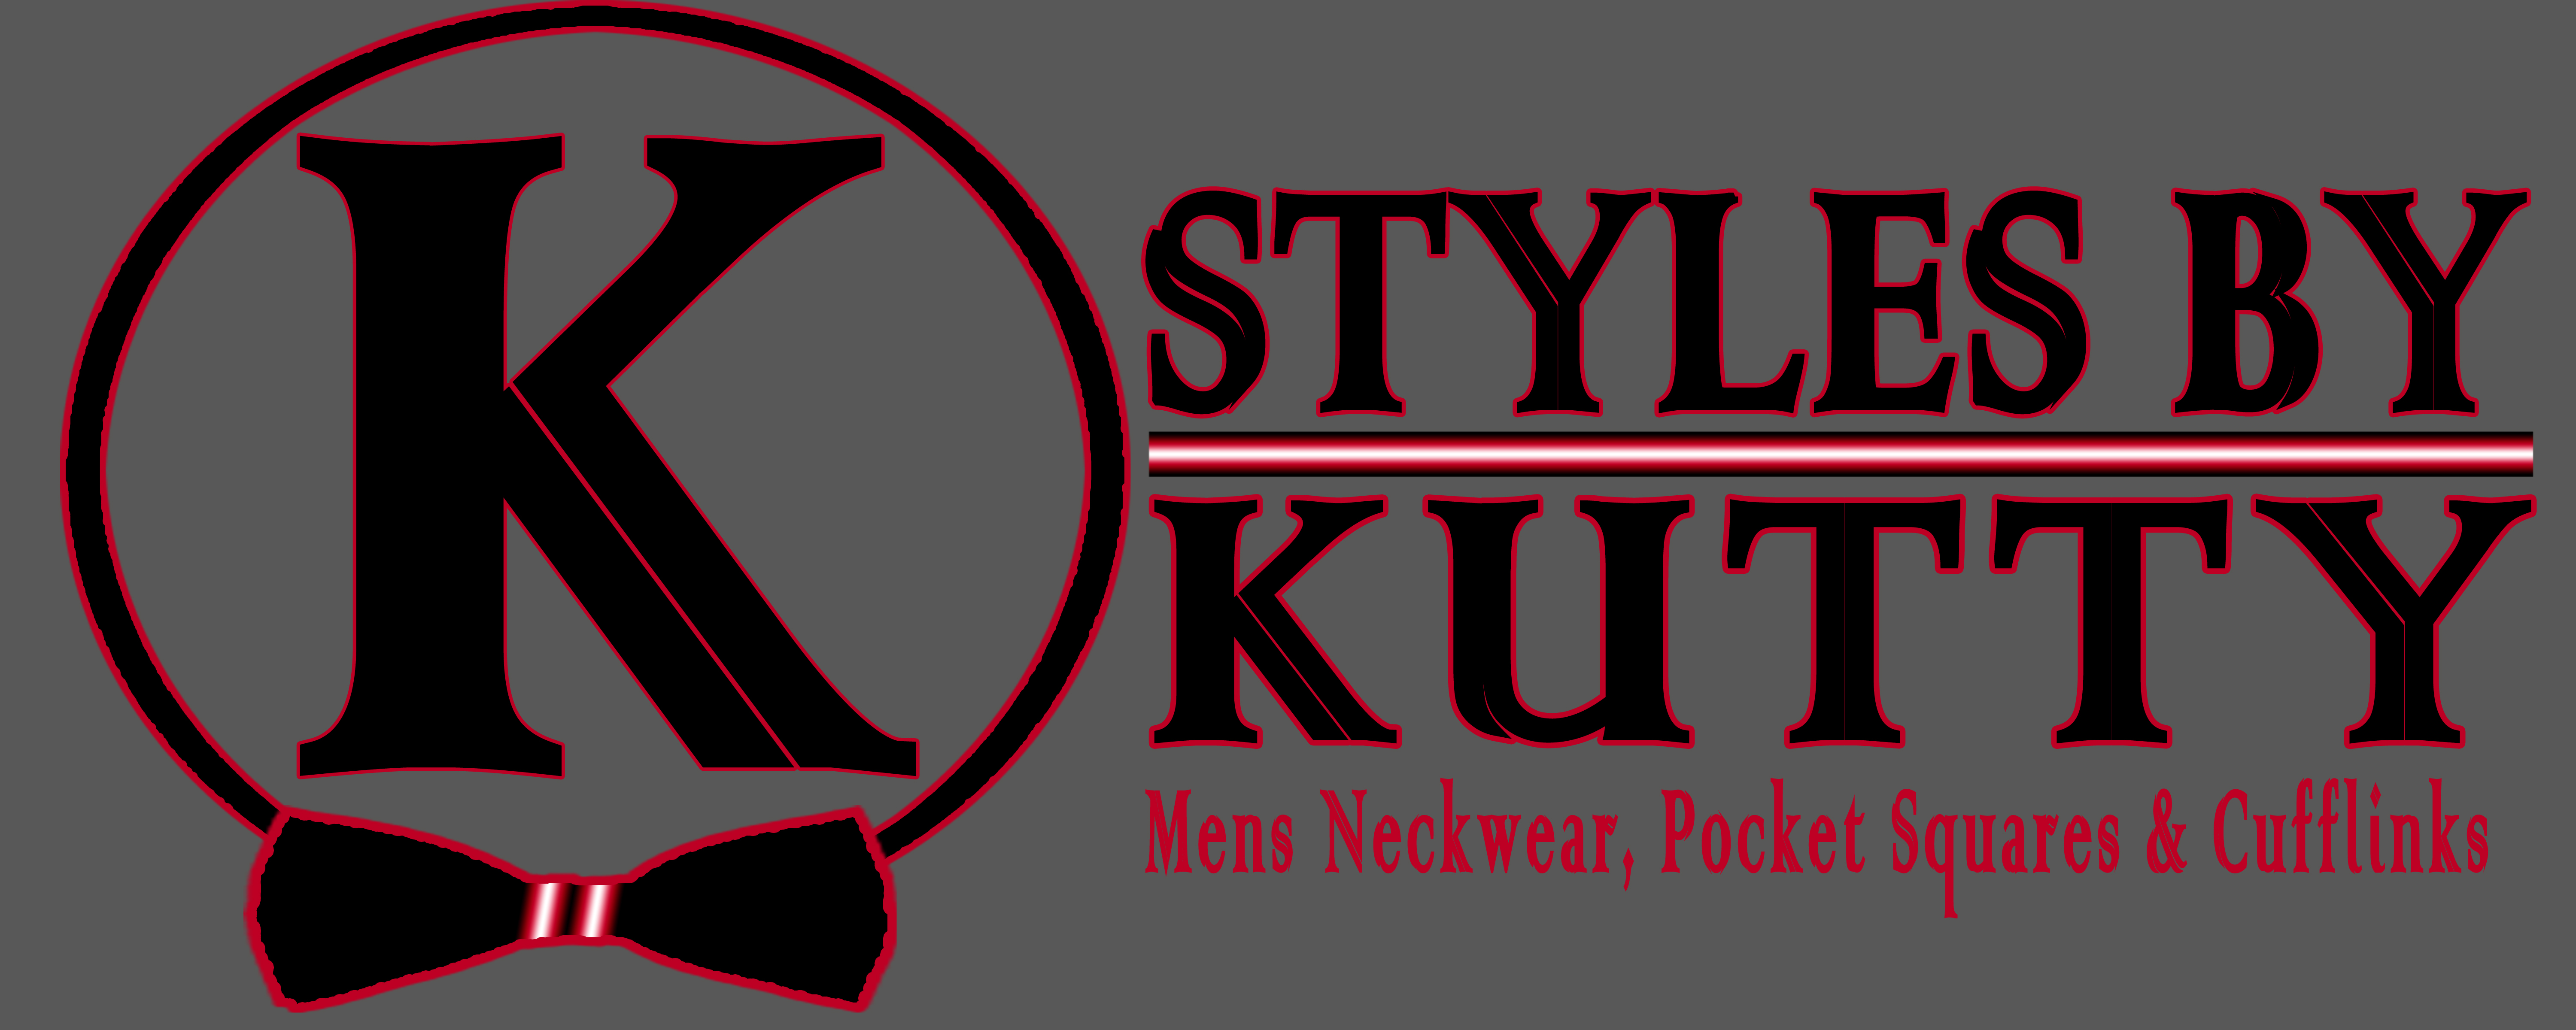 Styles By Kutty